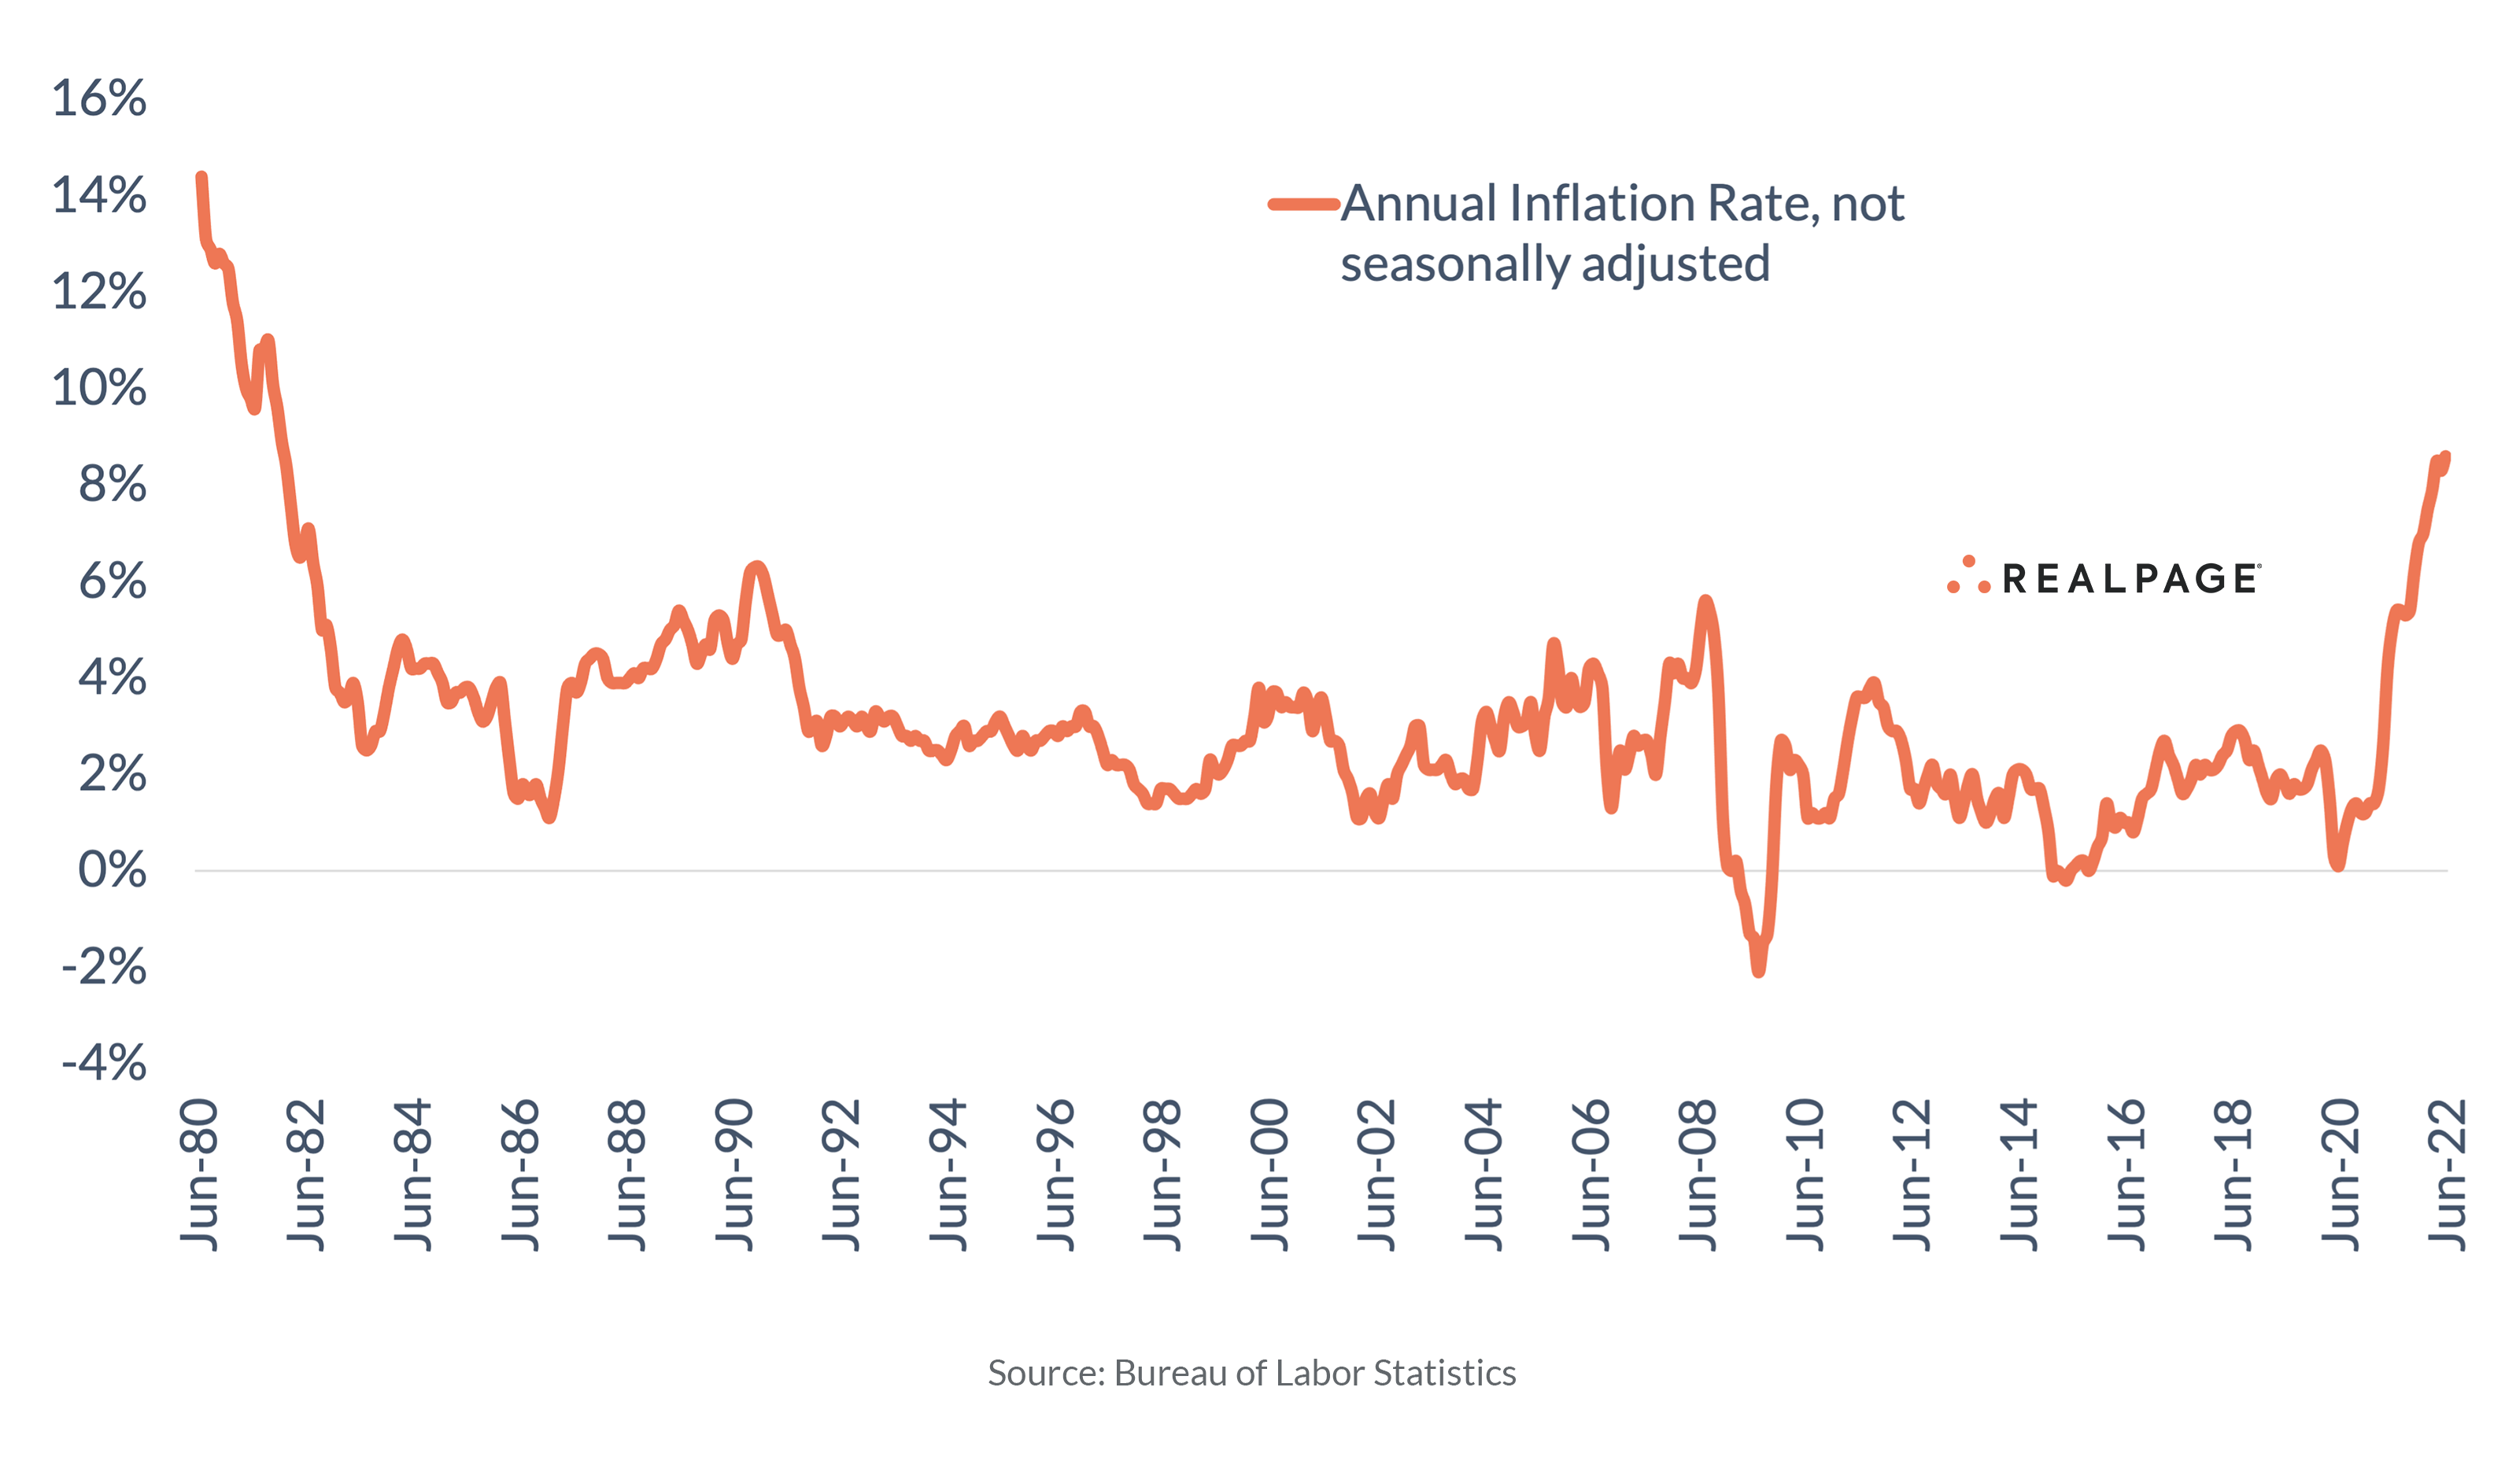 U.S. Inflation Reaches a New 40Year High RealPage Analytics Blog